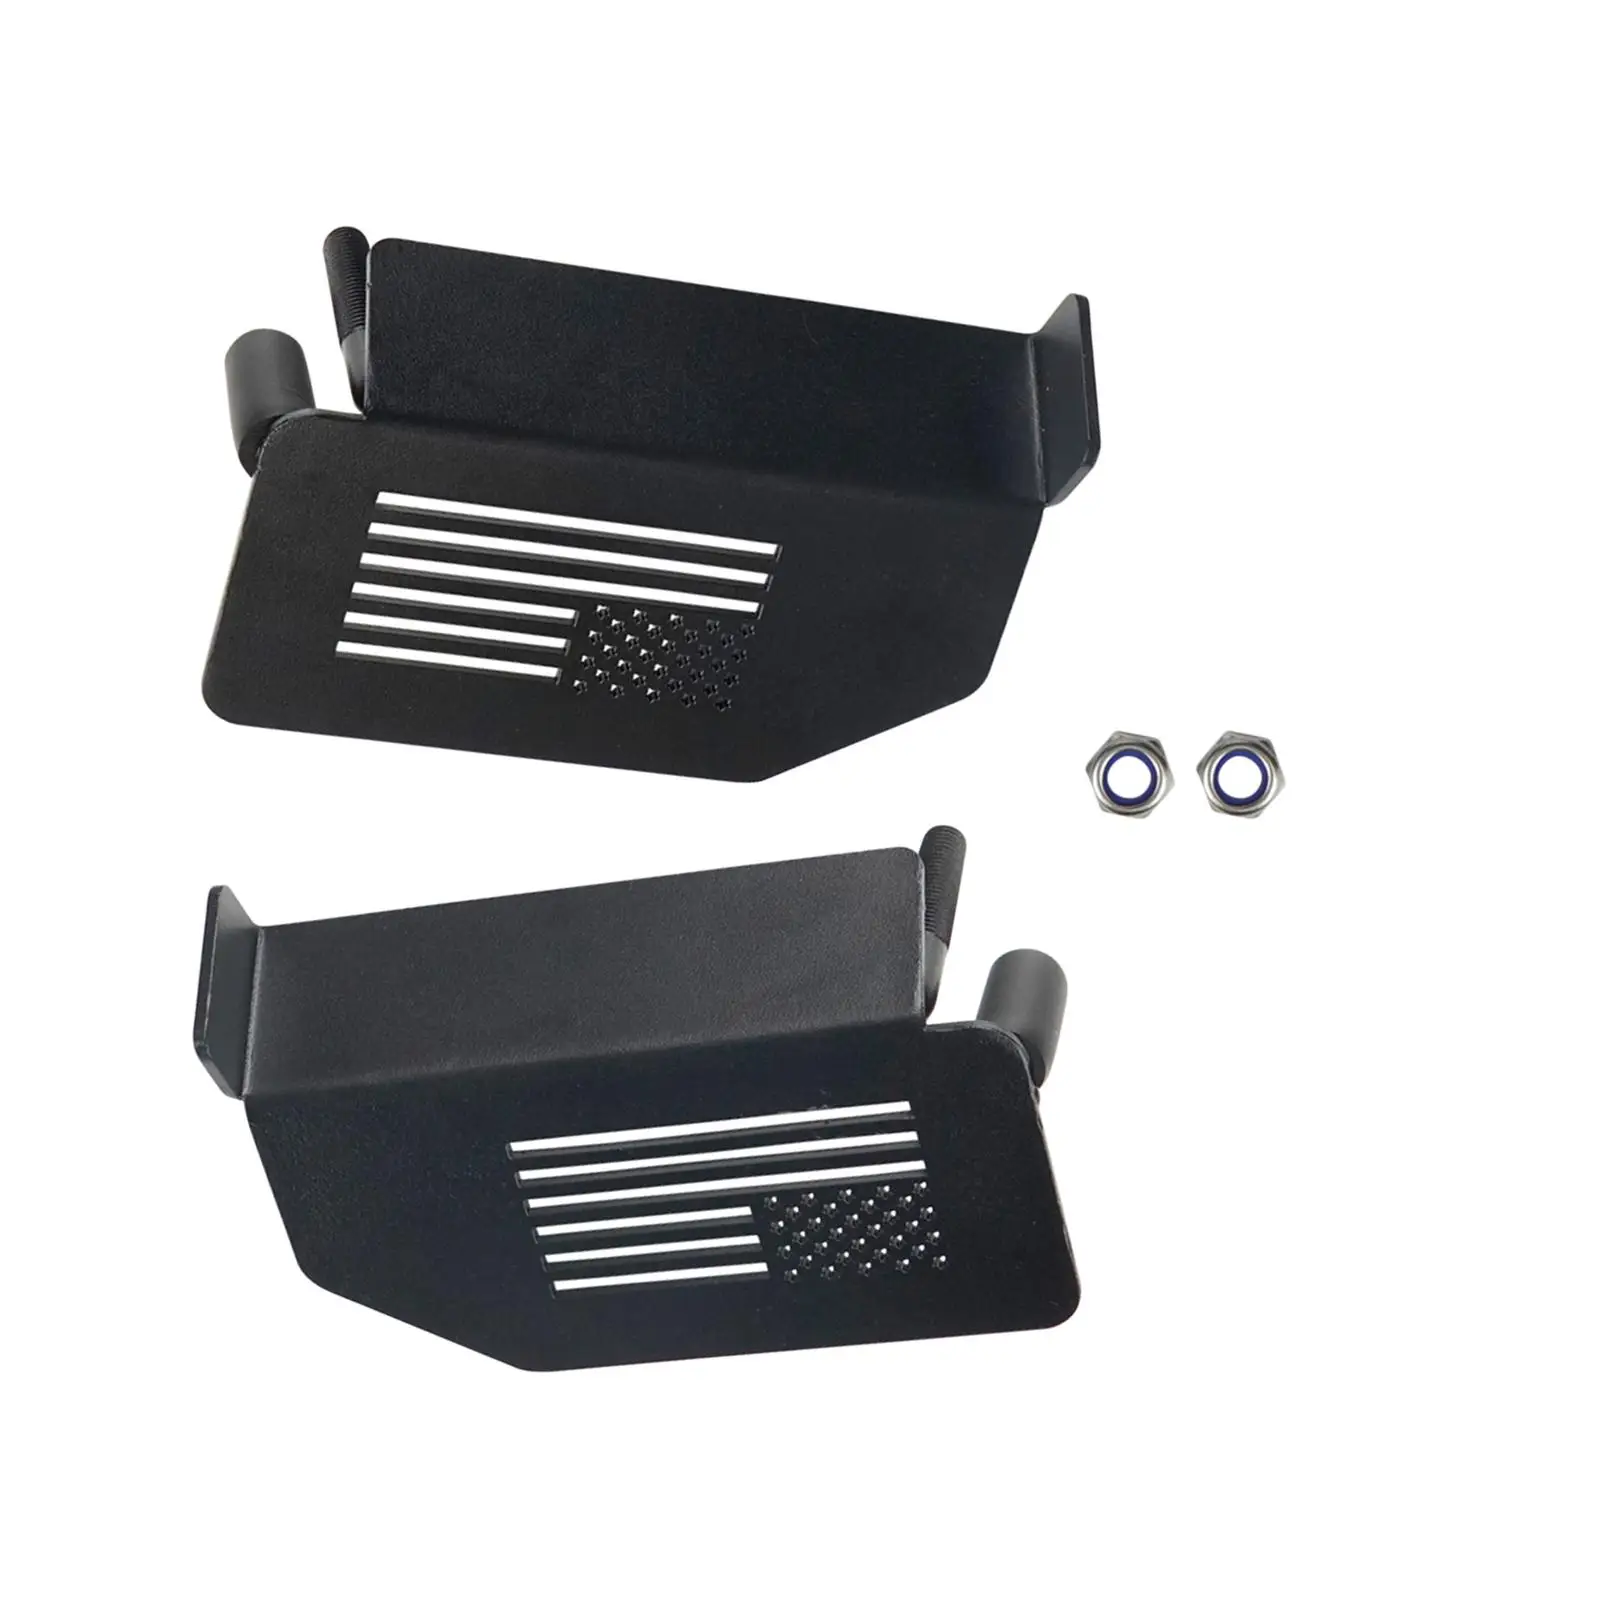 2x Door Off Foot Pegs Foot Rest Easy to Install Heavy Duty Metal with US Flag Anti Slip 120°Angle for JK JL Jt